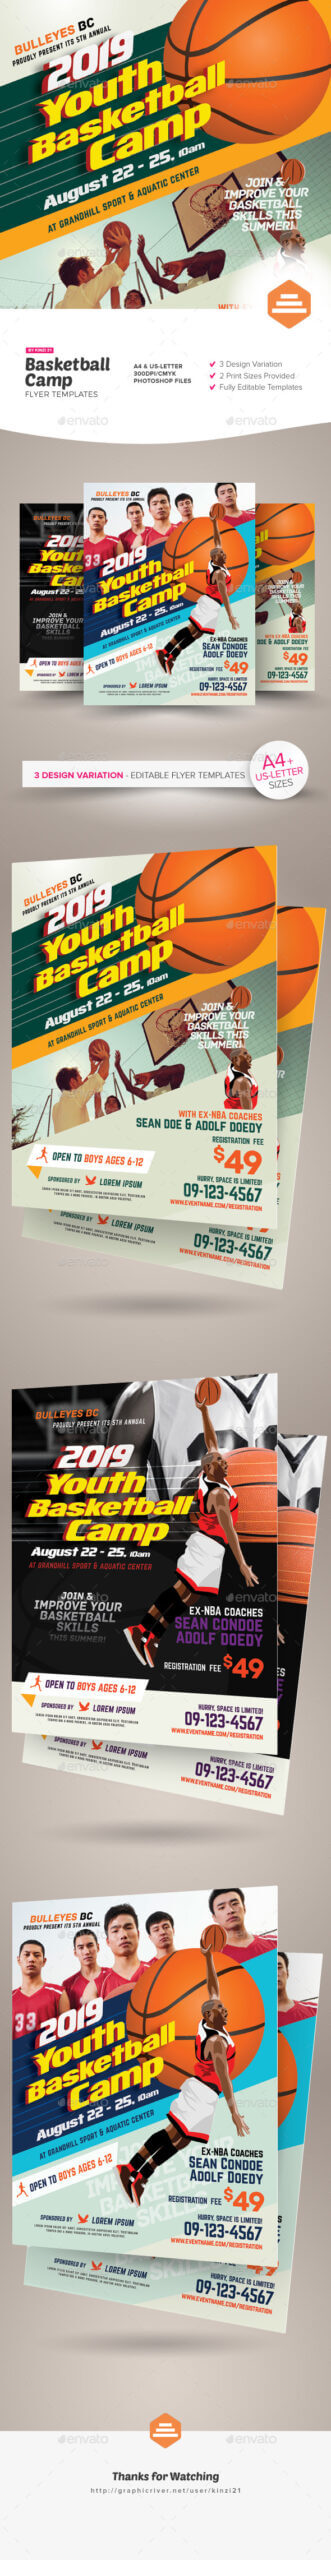 Coach Graphics, Designs & Templates From Graphicriver Intended For Basketball Camp Brochure Template